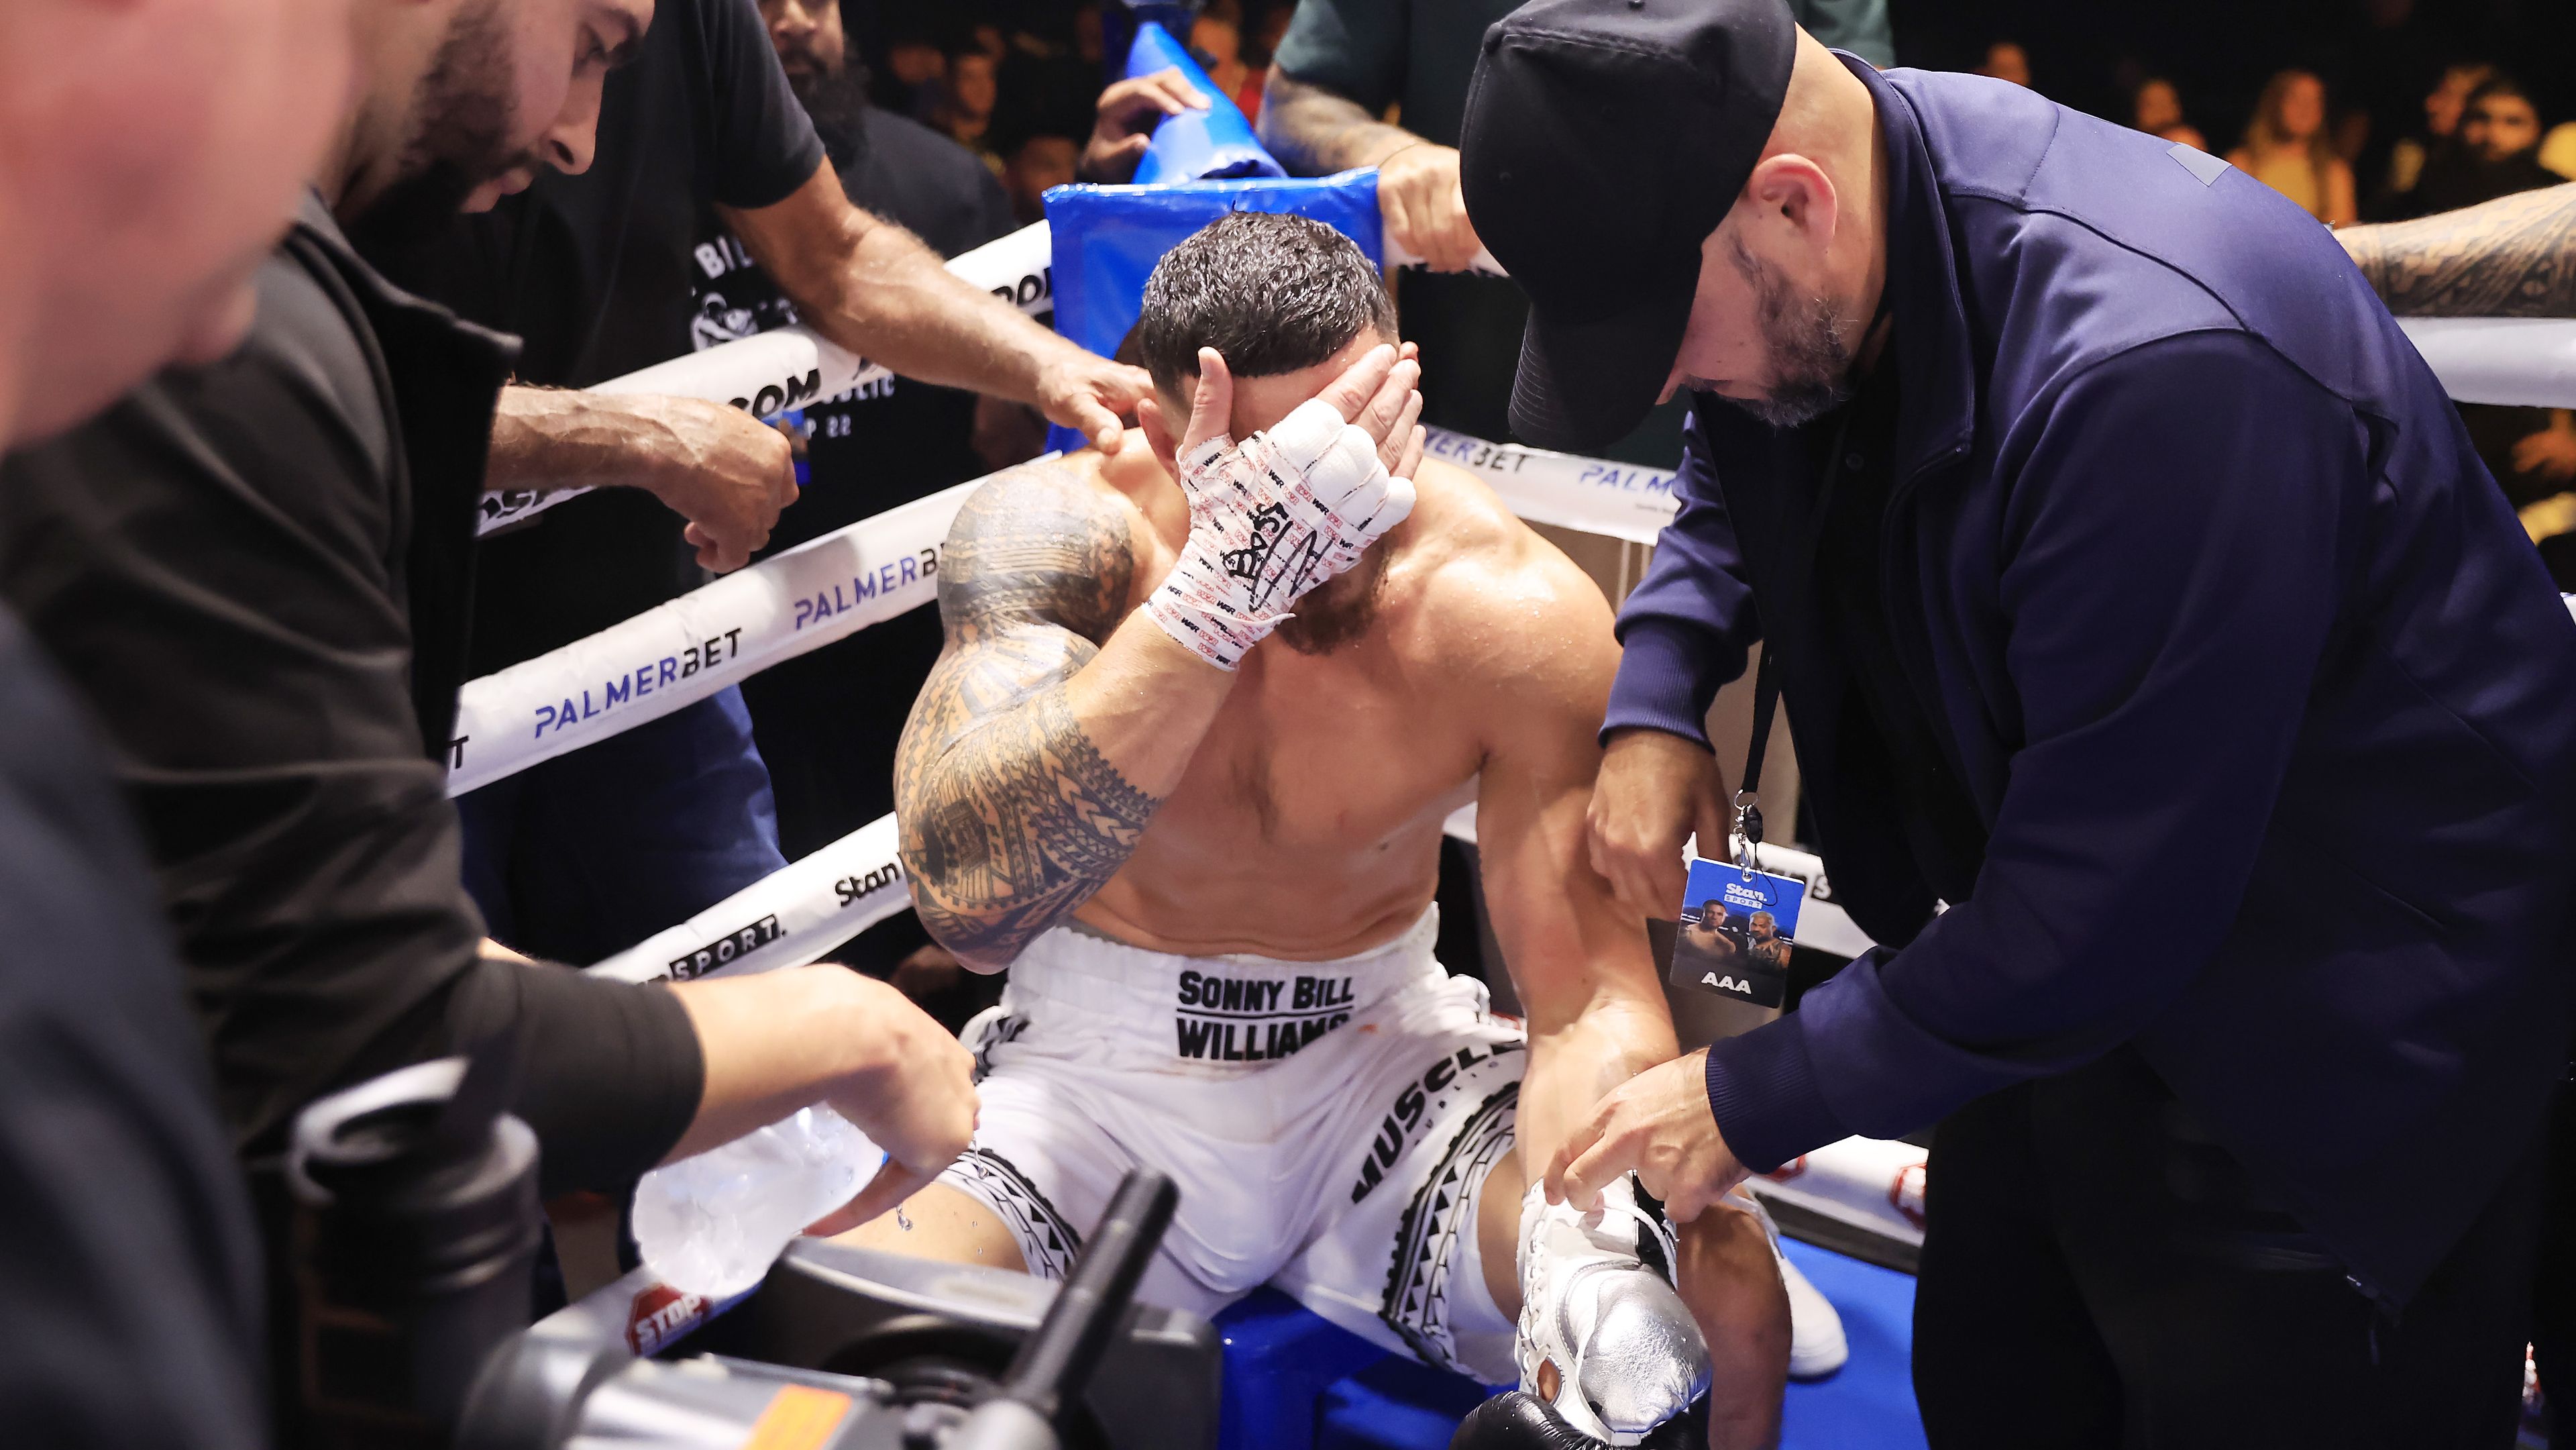 Sonny Bill Williams in his corner after his loss to Mark Hunt.